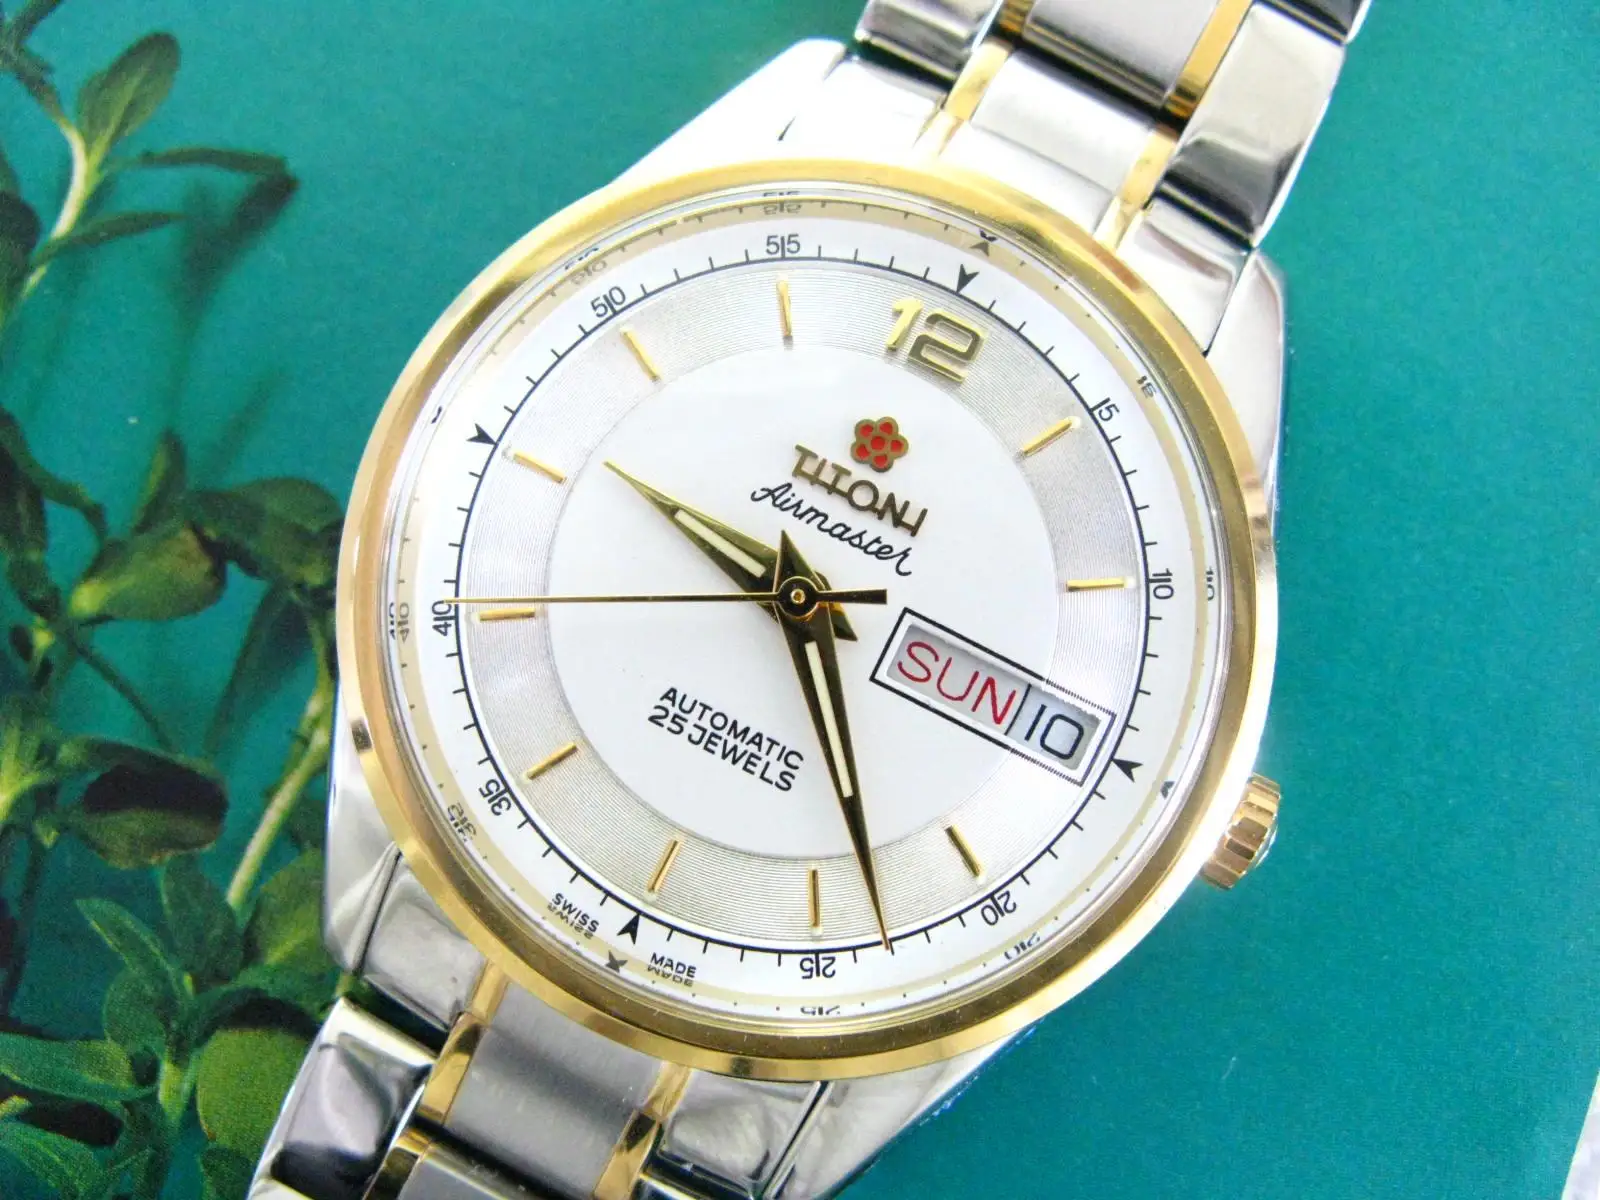 

Titoni 207 Inventory Airmaster White dial Gold plated Steel Swiss Men's Mechanical Watch ETA 2836-2